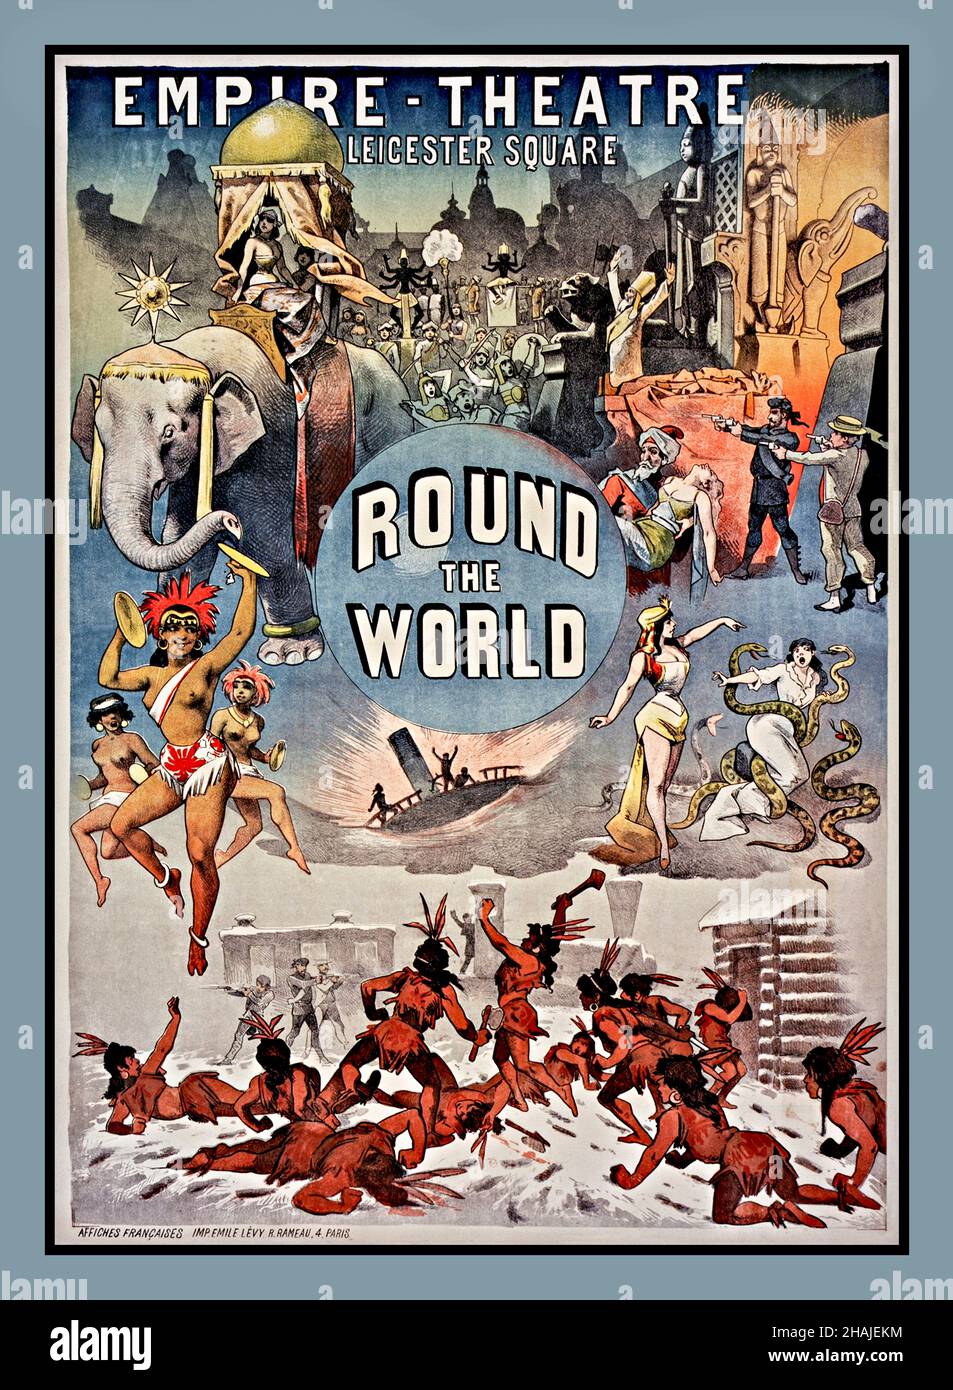 Archiv 1880s Empire Theatre Vintage 1885 internationale Revue Entertainment Poster 'ROUND THE WORLD' Leicester Square London UK Stockfoto